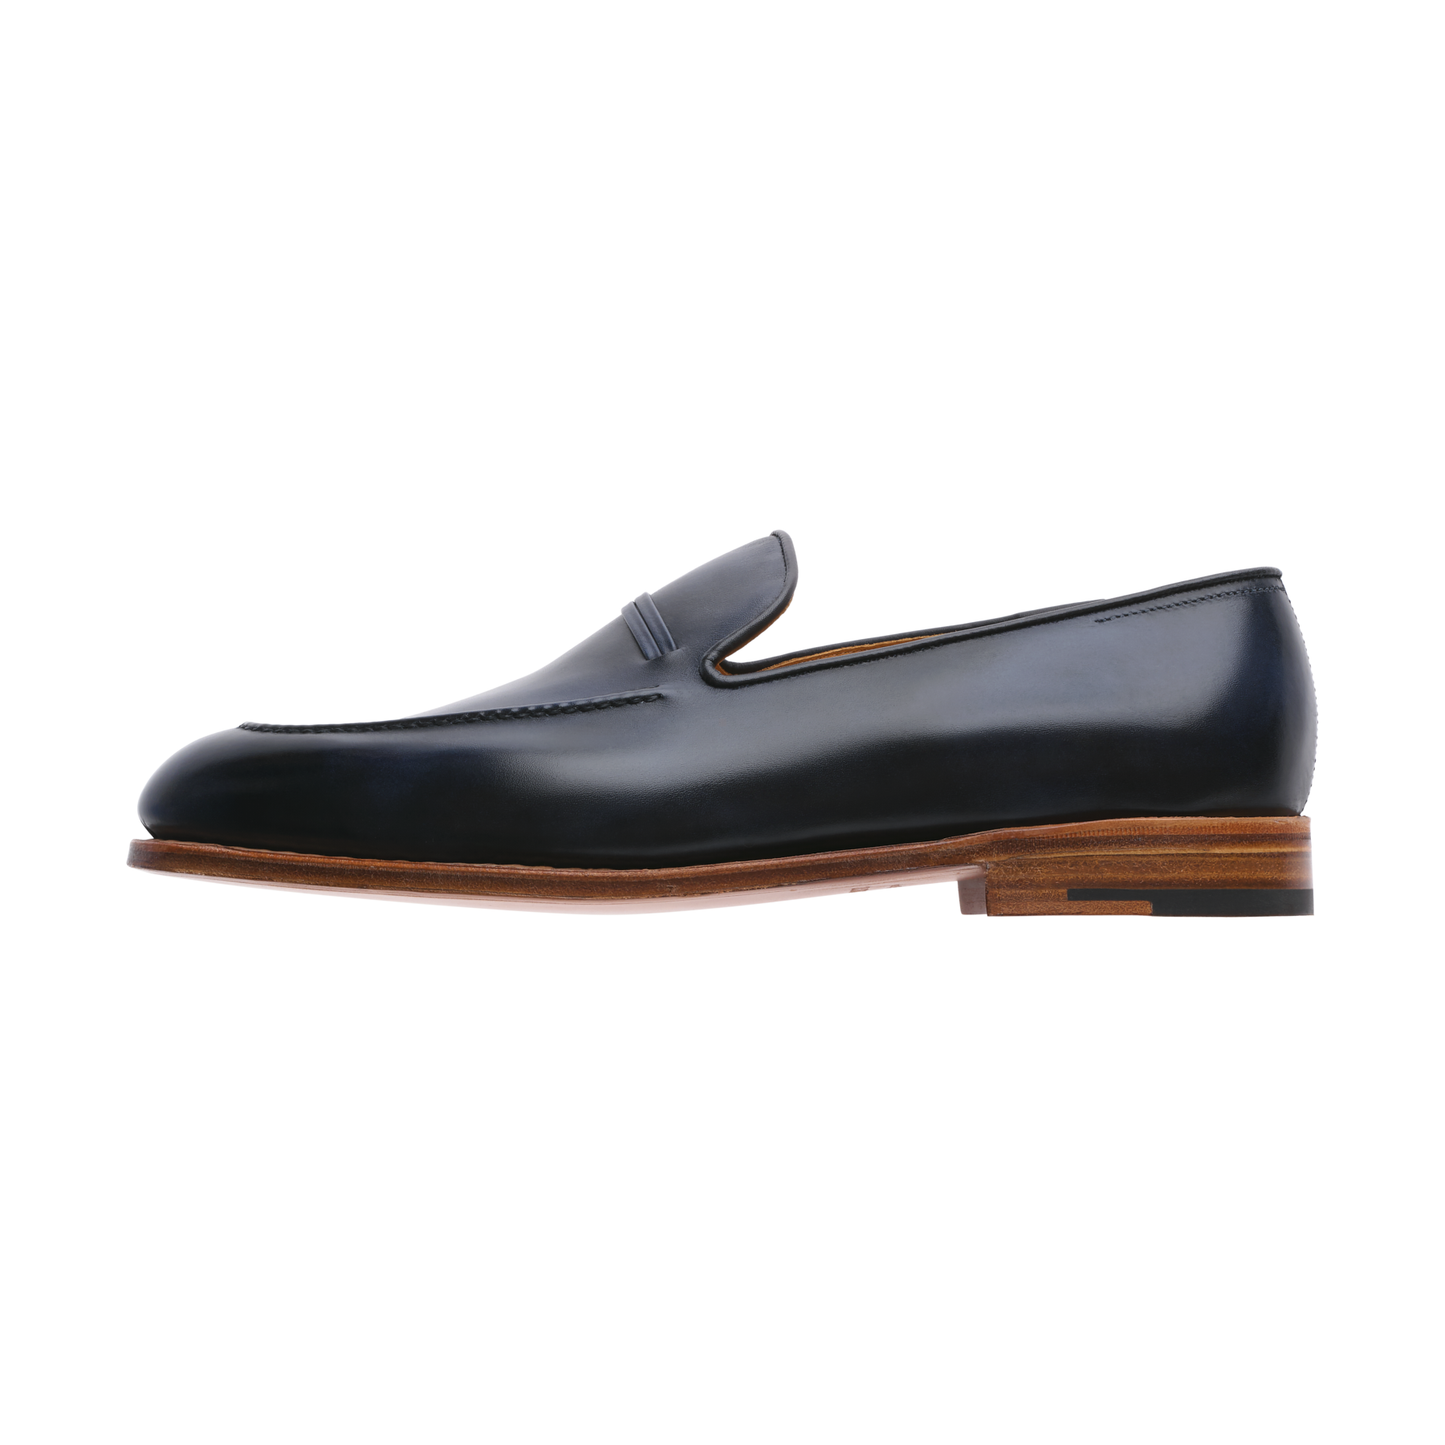 John Lobb "Amble" Classic Leather Loafer with Hand-Stitched Apron in Blue - SARTALE